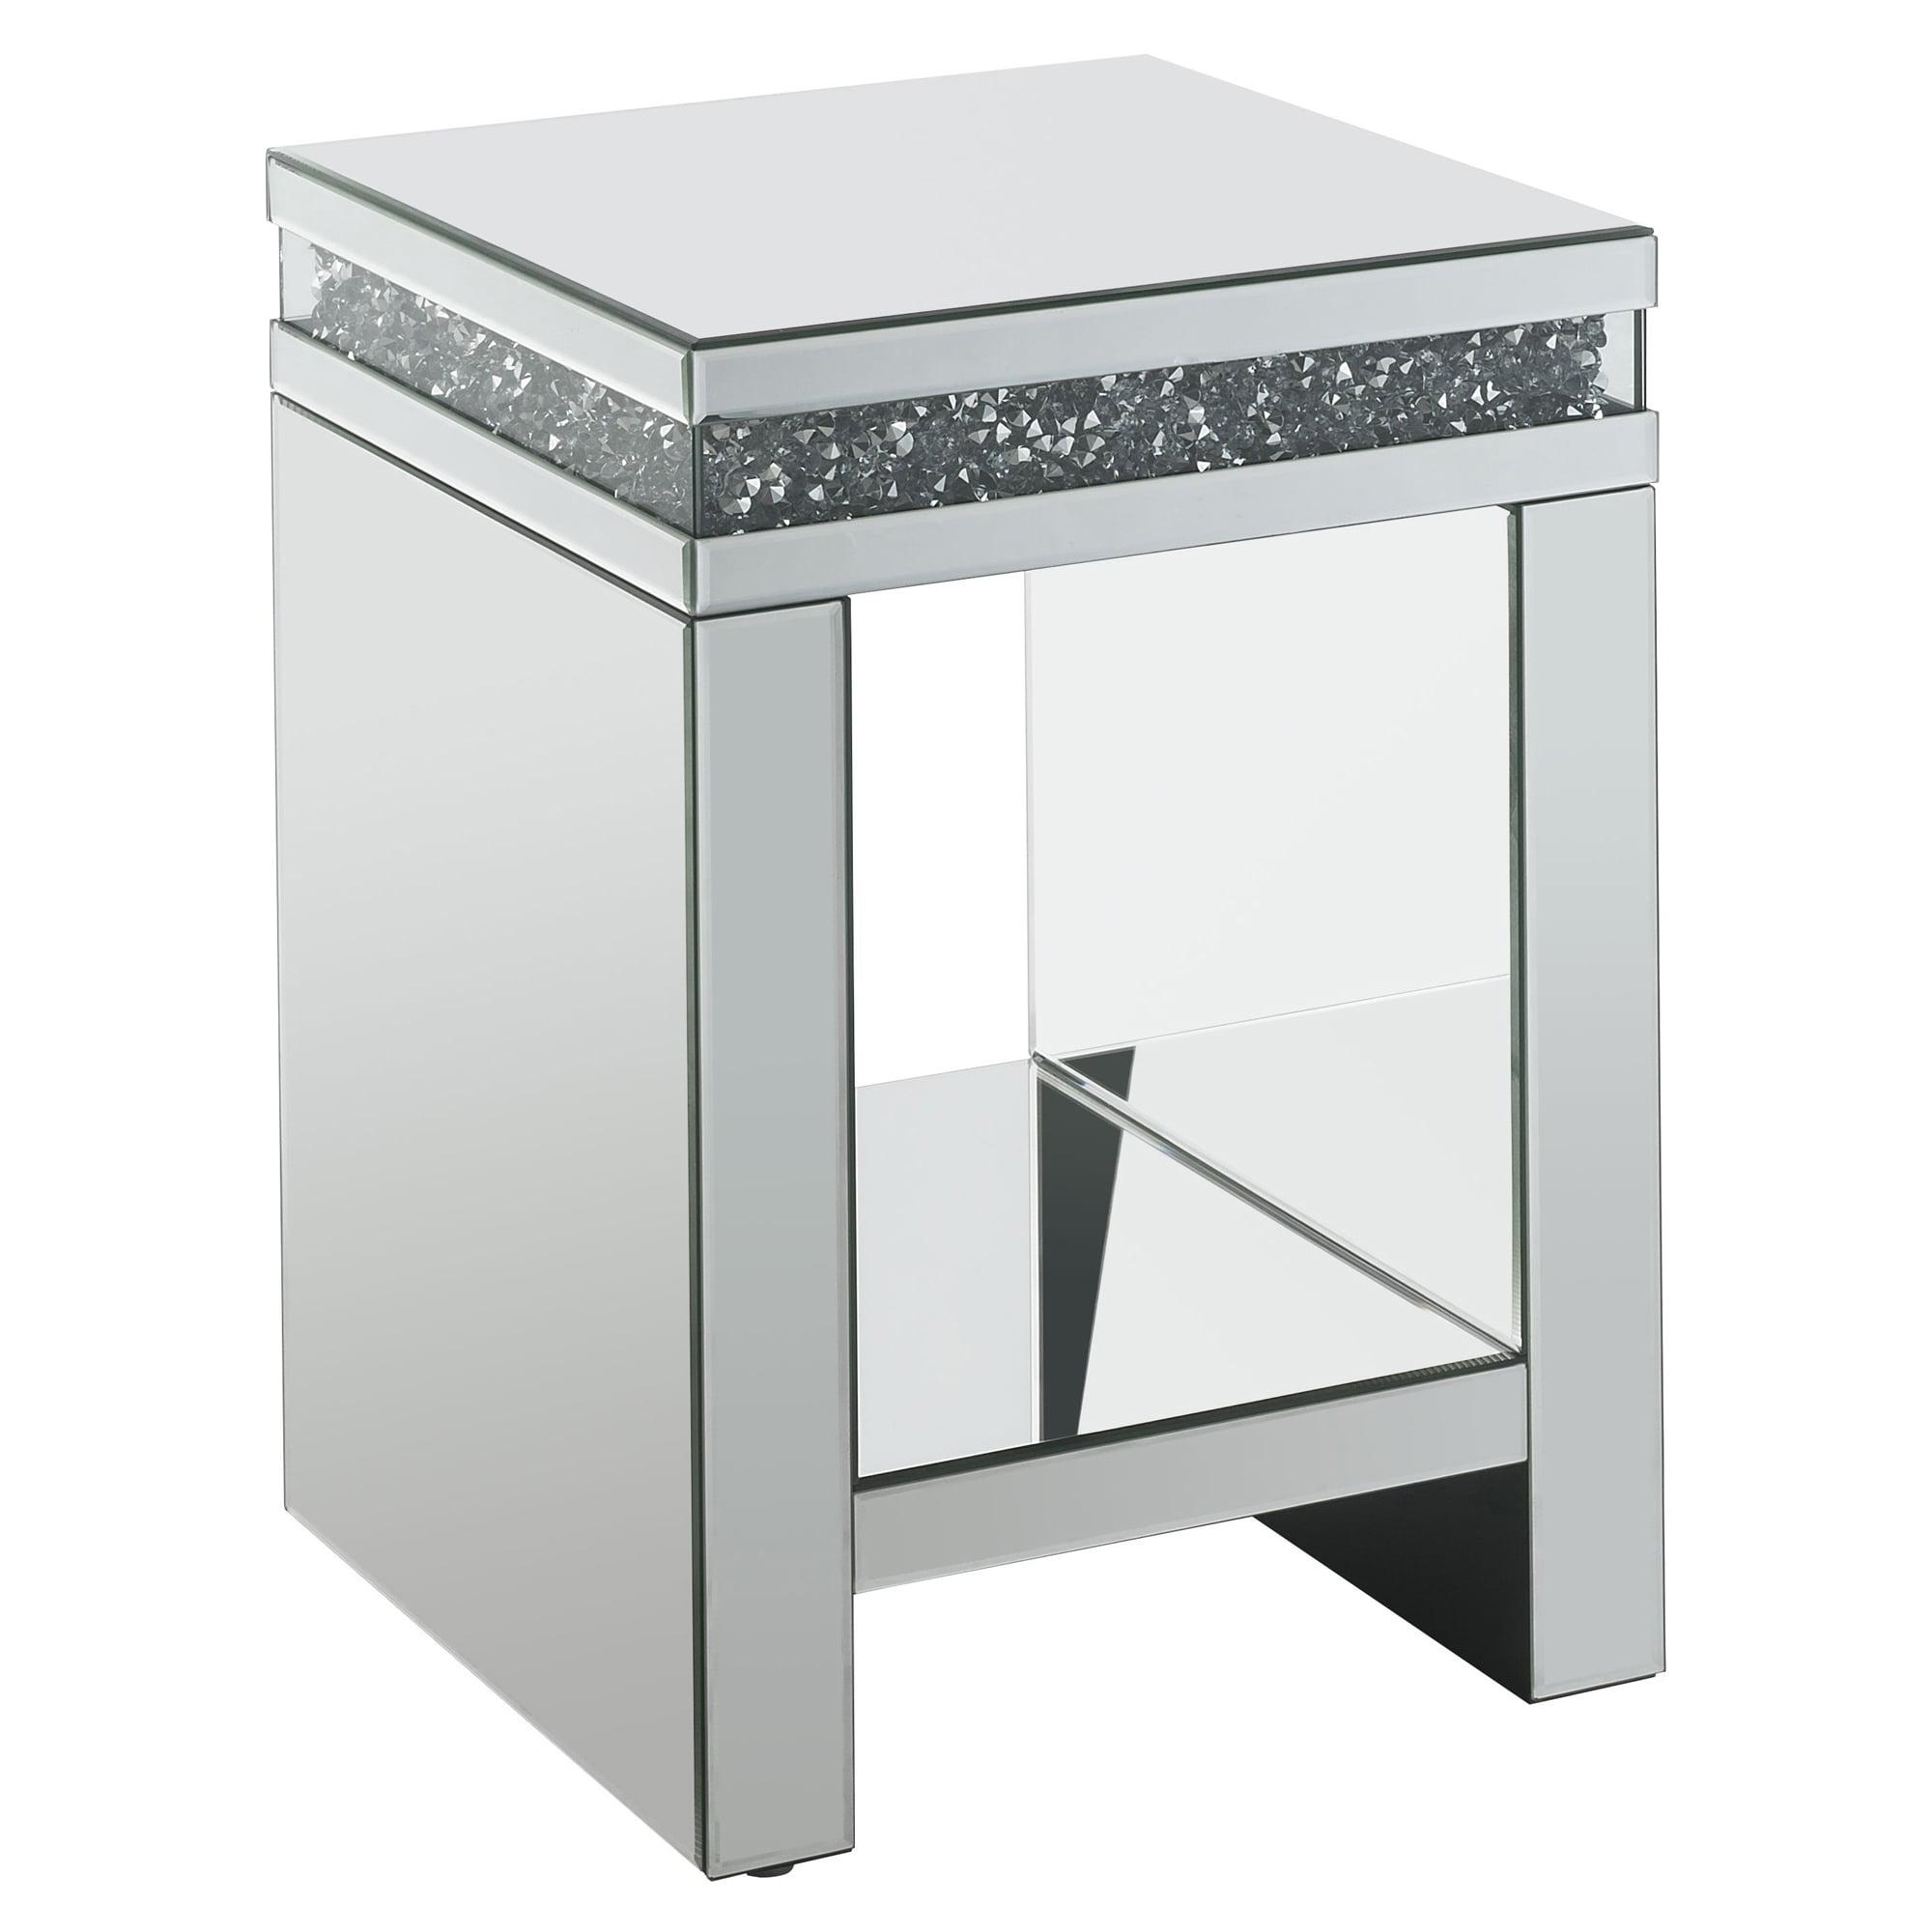 Gleaming 53'' Mirrored Wood Accent Table with Faux Diamonds